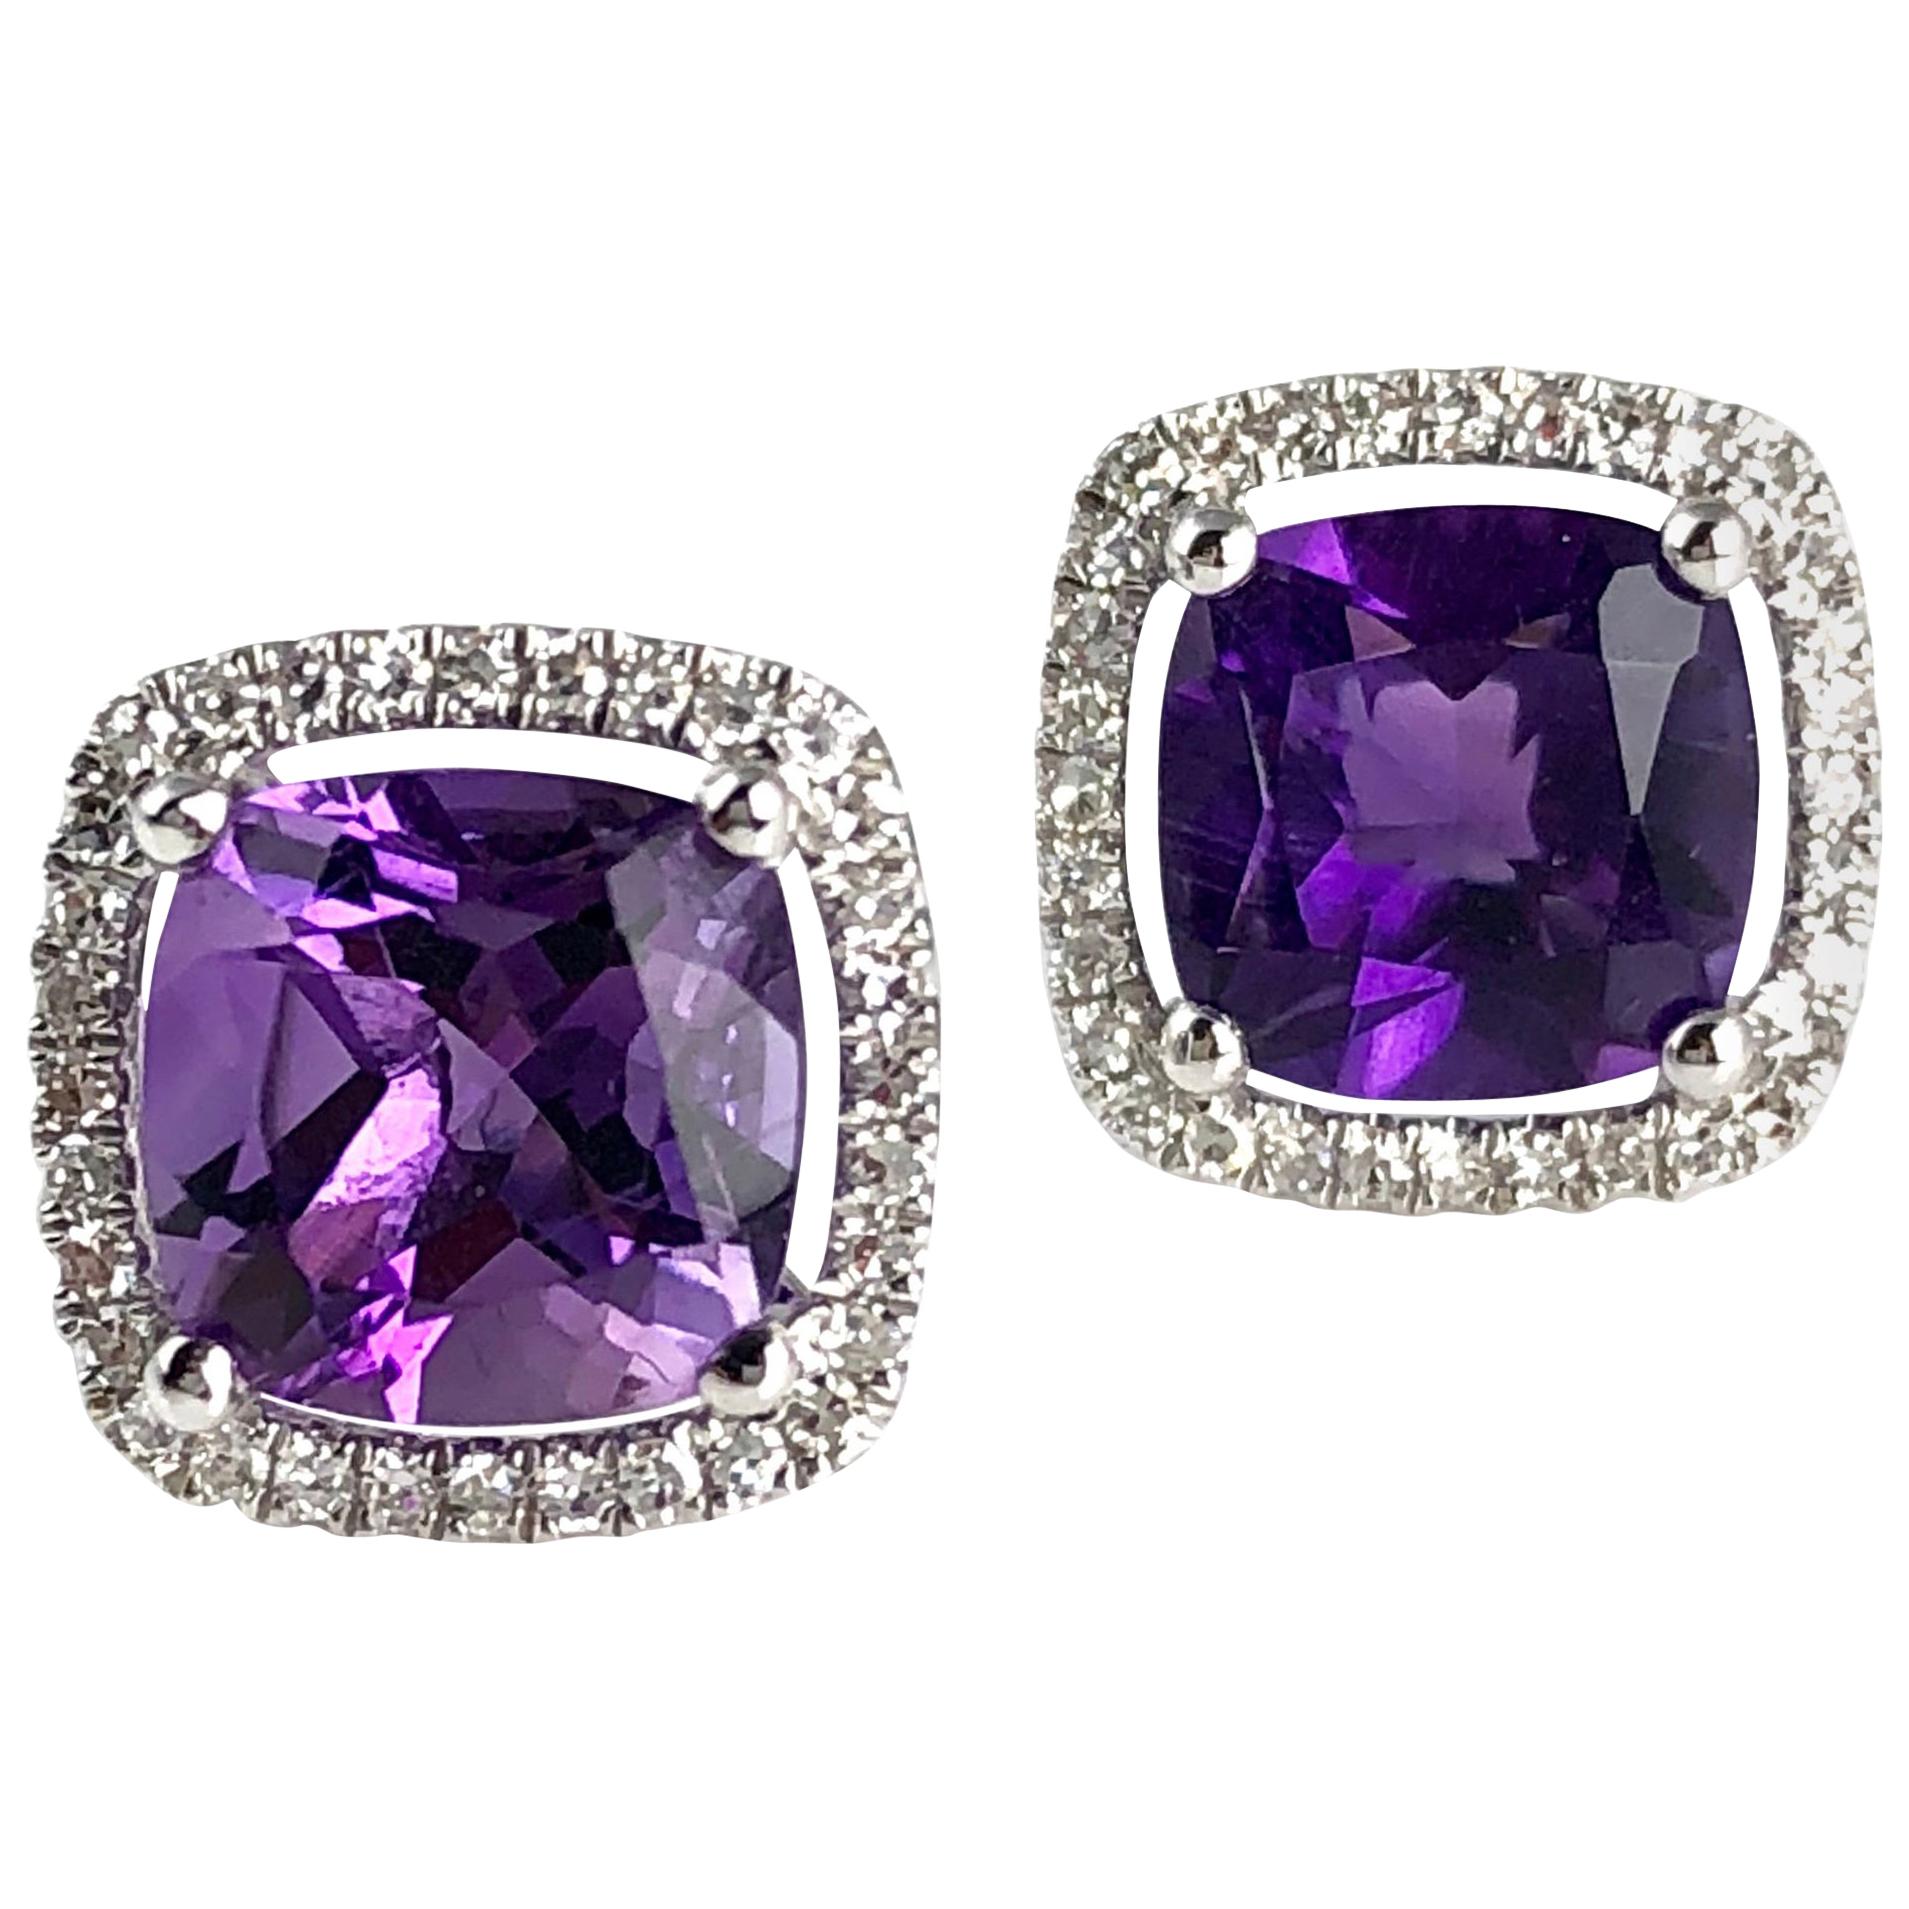 Introducing these stunning halo stud earrings, a true masterpiece of elegance and sophistication. Crafted with the utmost care and precision, they are designed to captivate and complement your style.

Fine Amethyst Brilliance: The earrings feature a